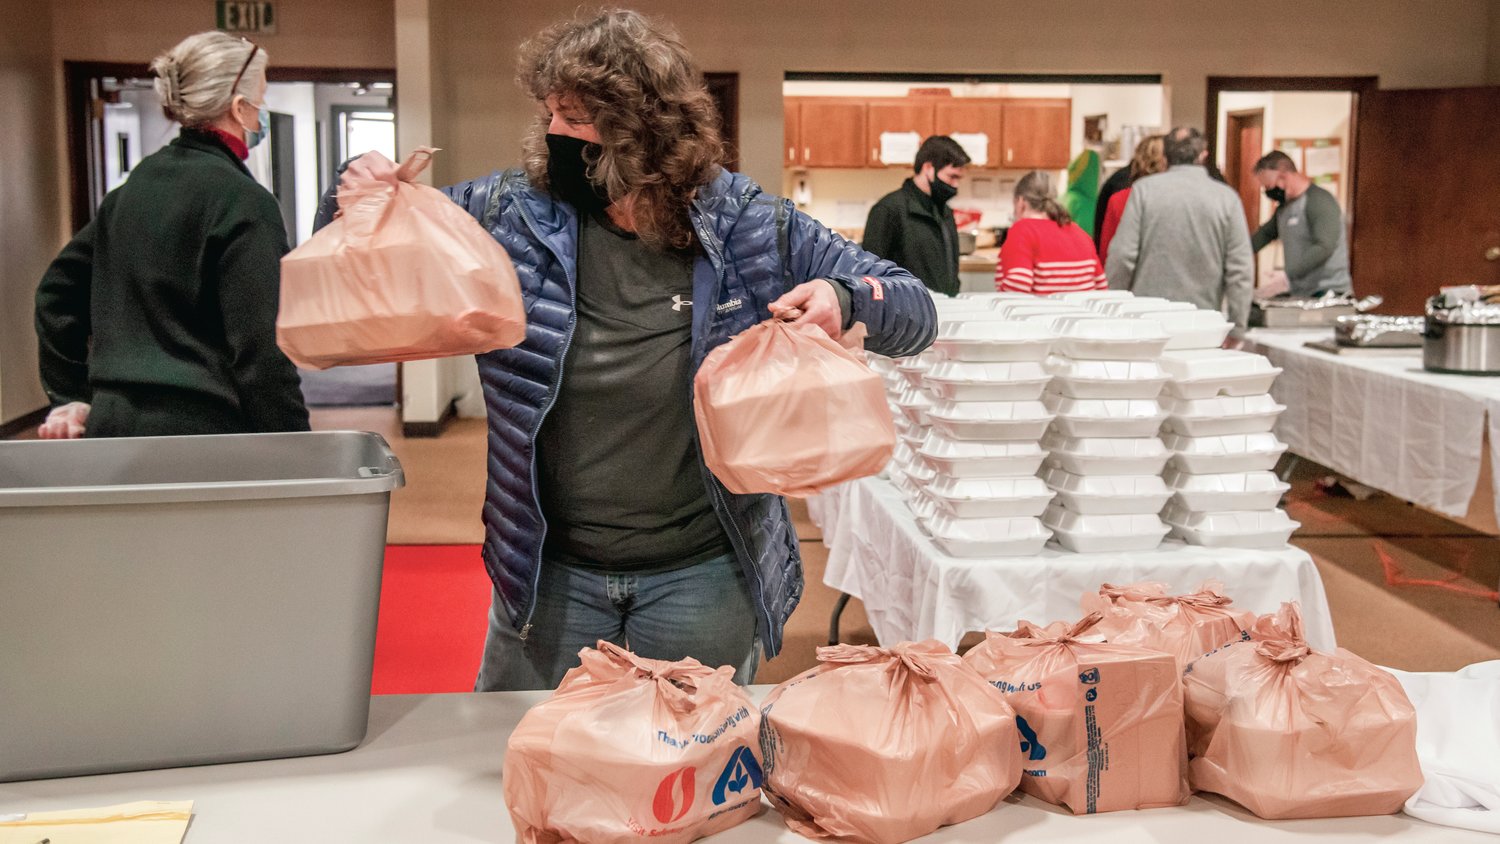 Chris Cooper grabs meals for a delivery after describing an encounter she had with a young girl who recieved a meal and said, “Maybe Christmas isn’t going to be as bad after all.”